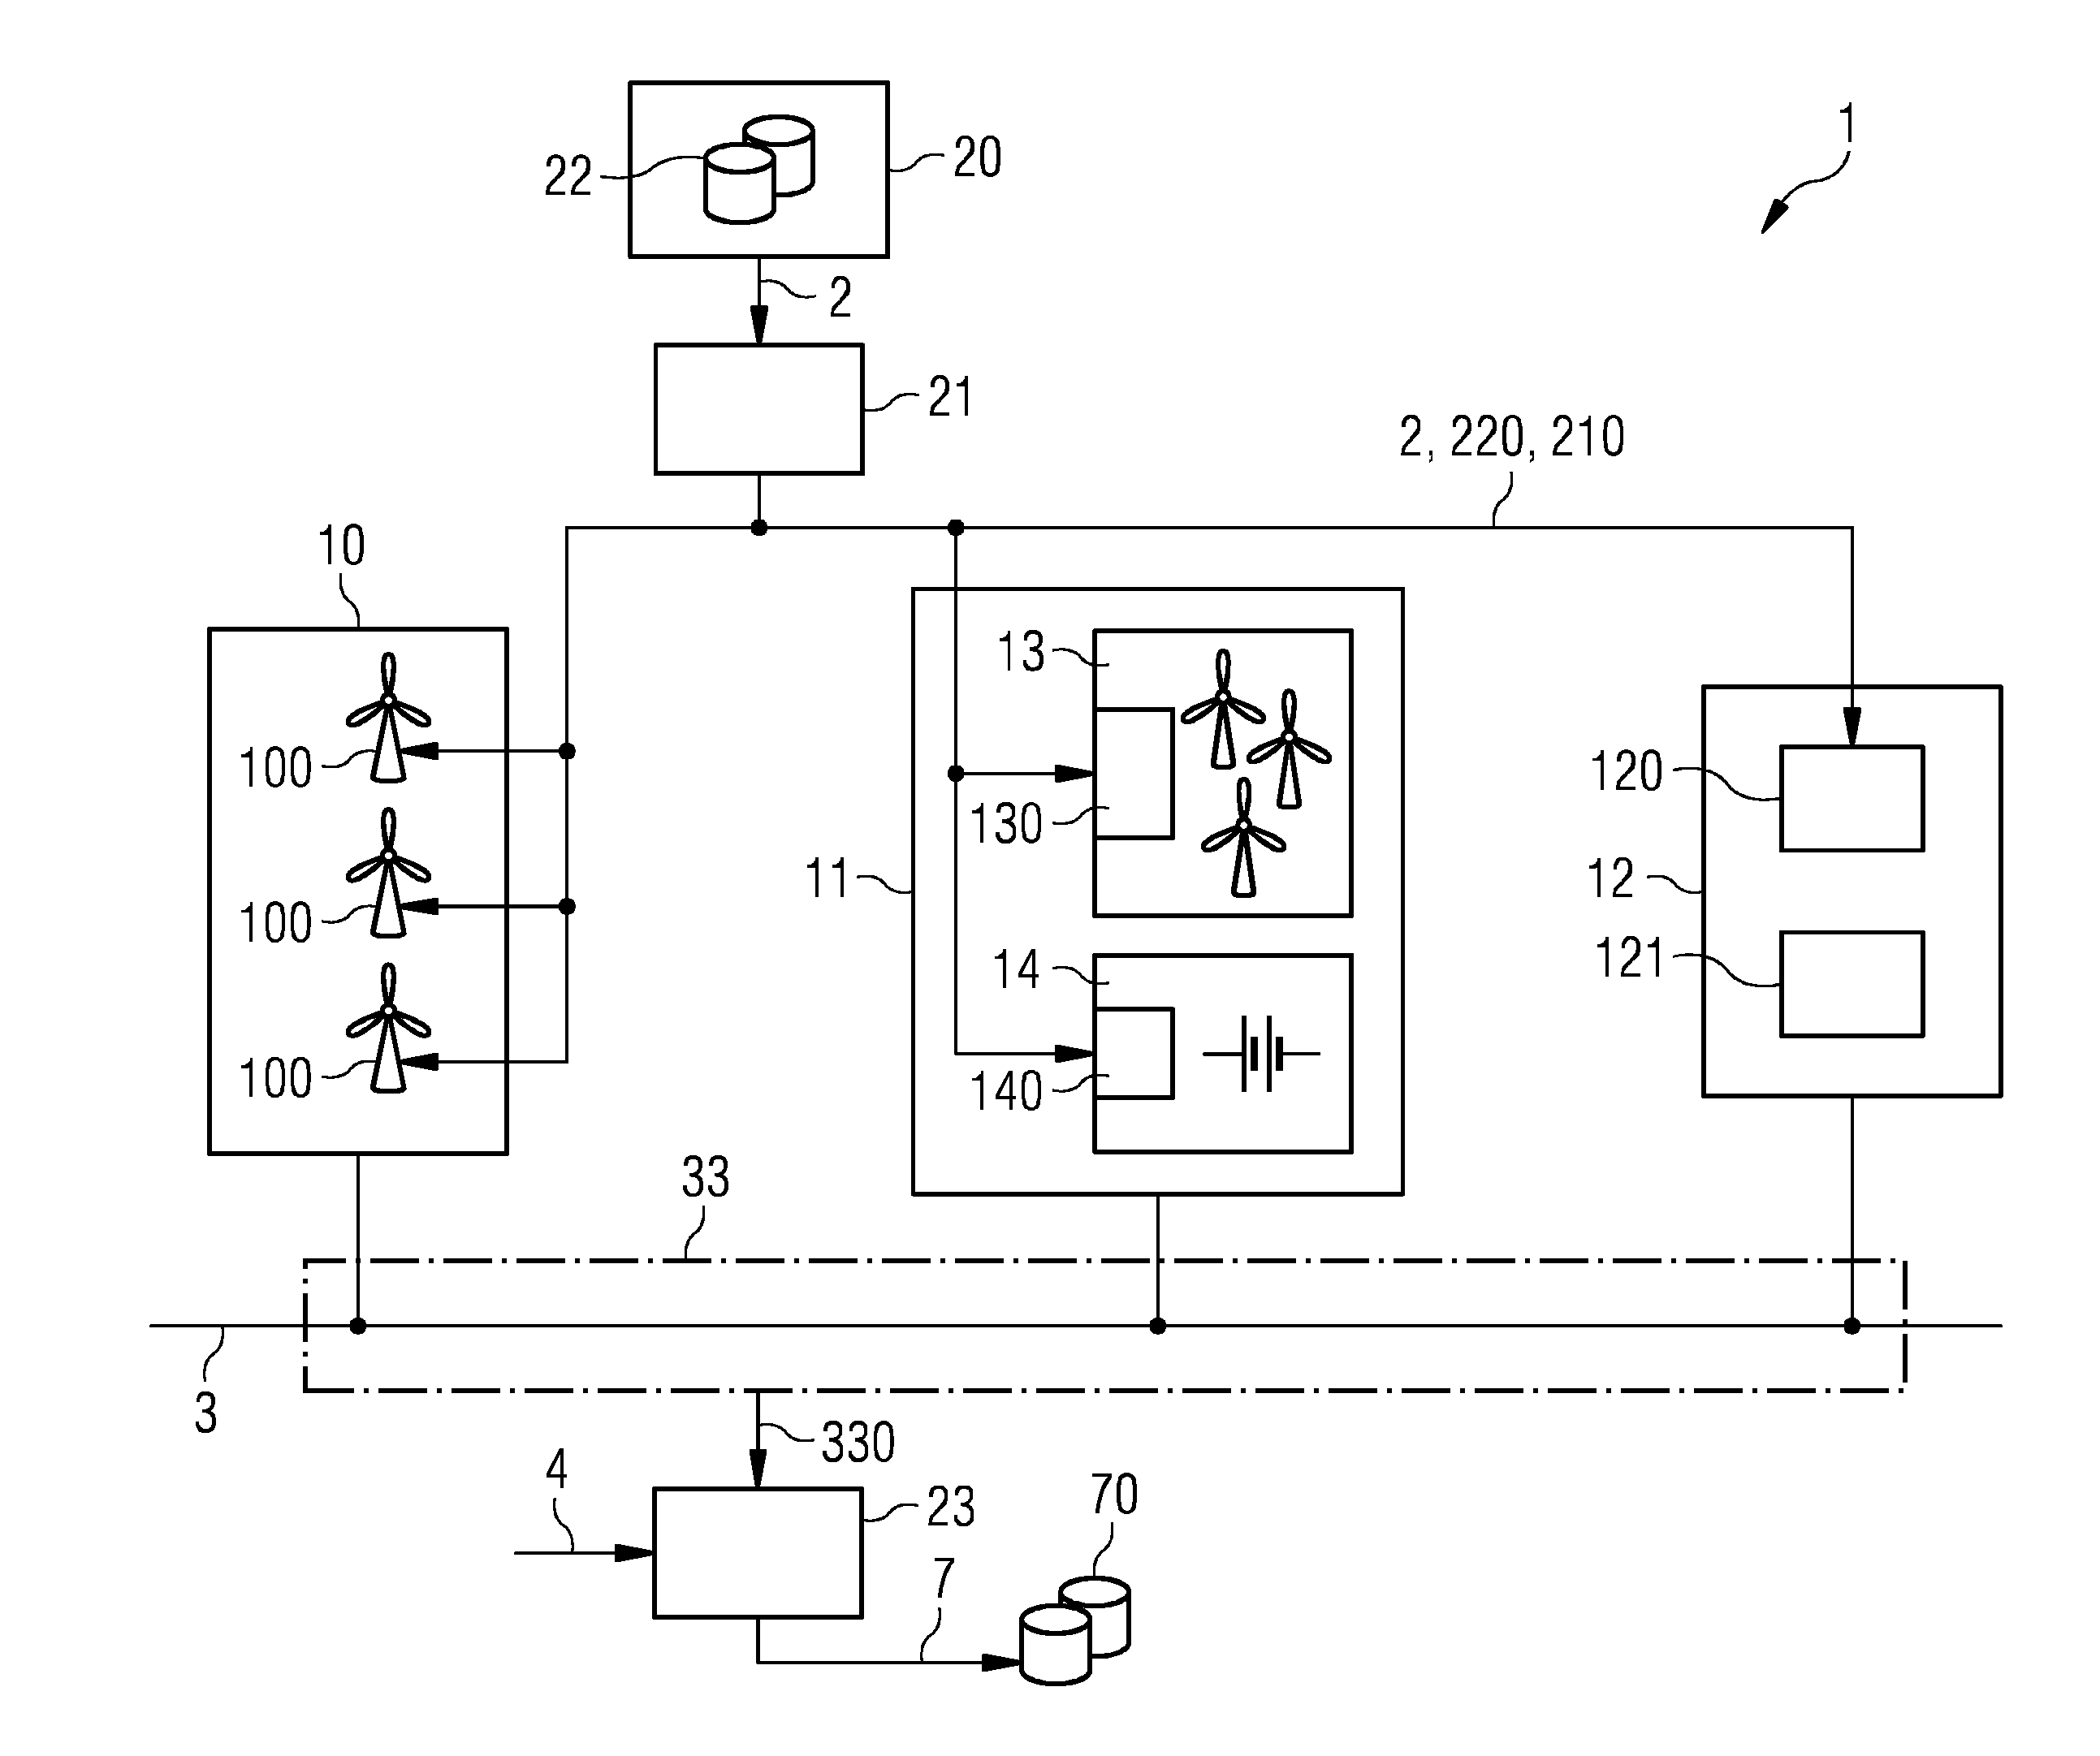 Test system for determining a frequency response of a virtual power plant